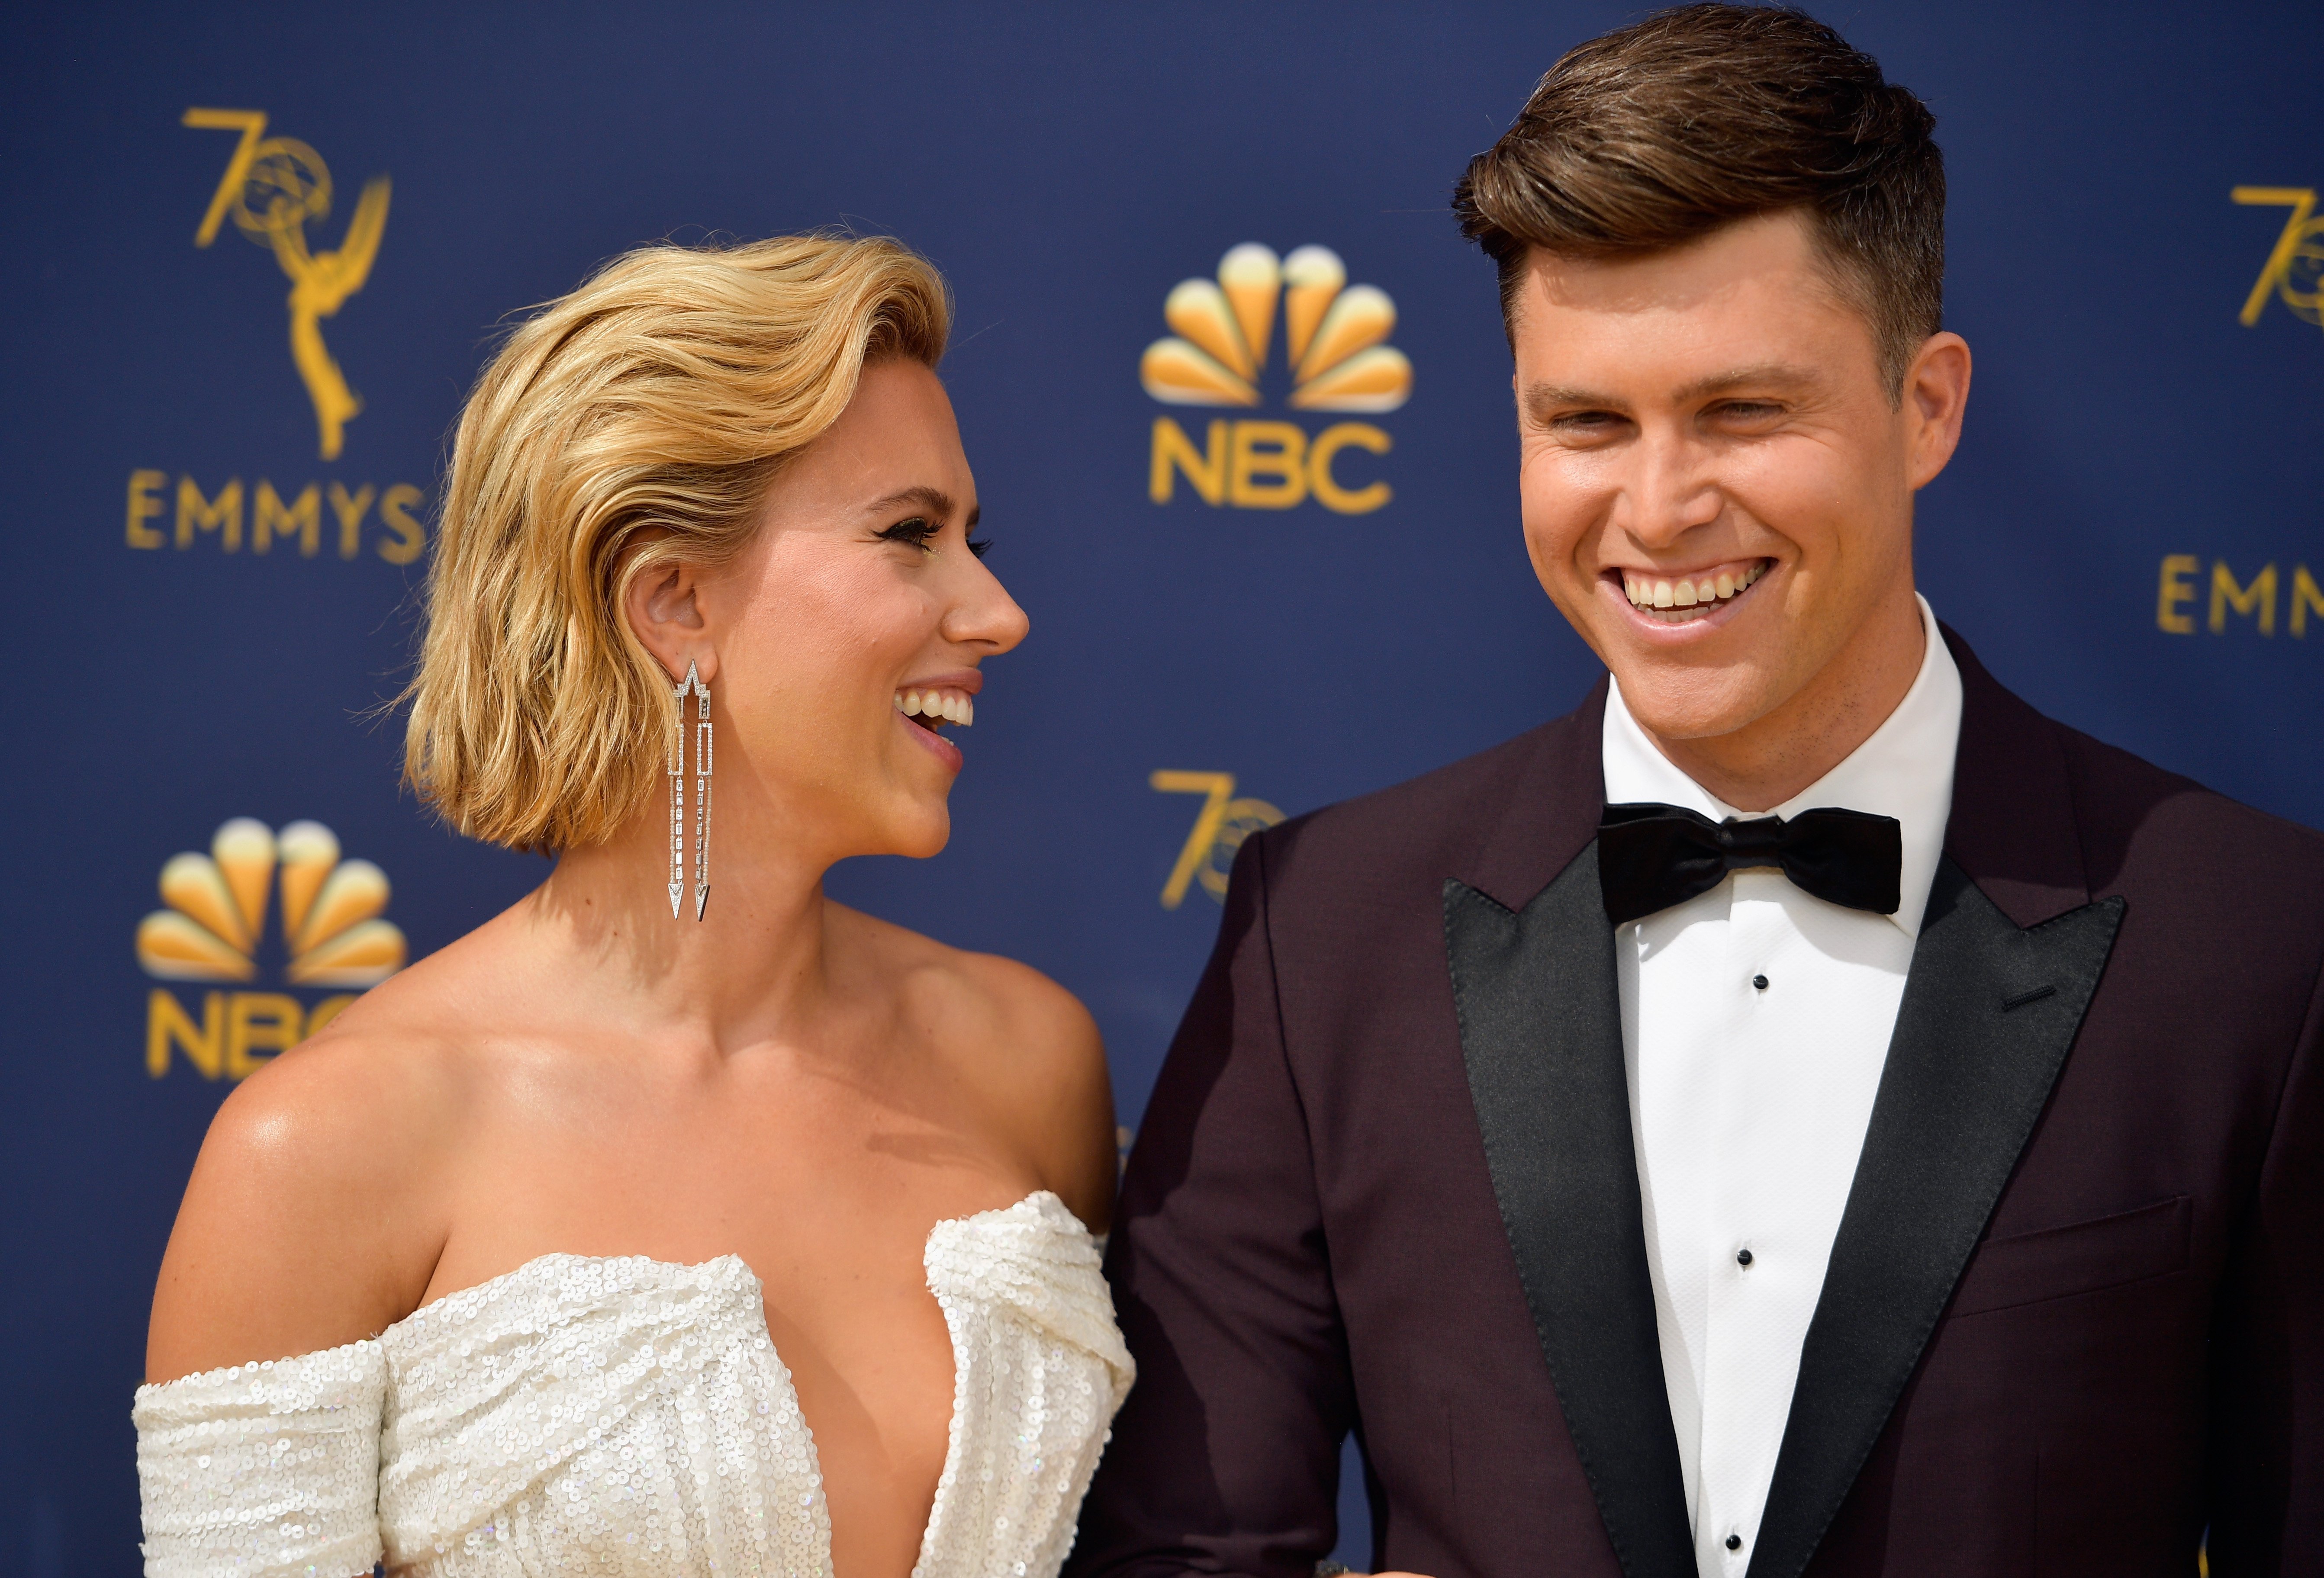 Actress Scarlett Johansson and Colin Jost attend the 70th Emmy Awards at Microsoft Theater on September 17, 2018 in Los Angeles, California | Photo: Getty Images